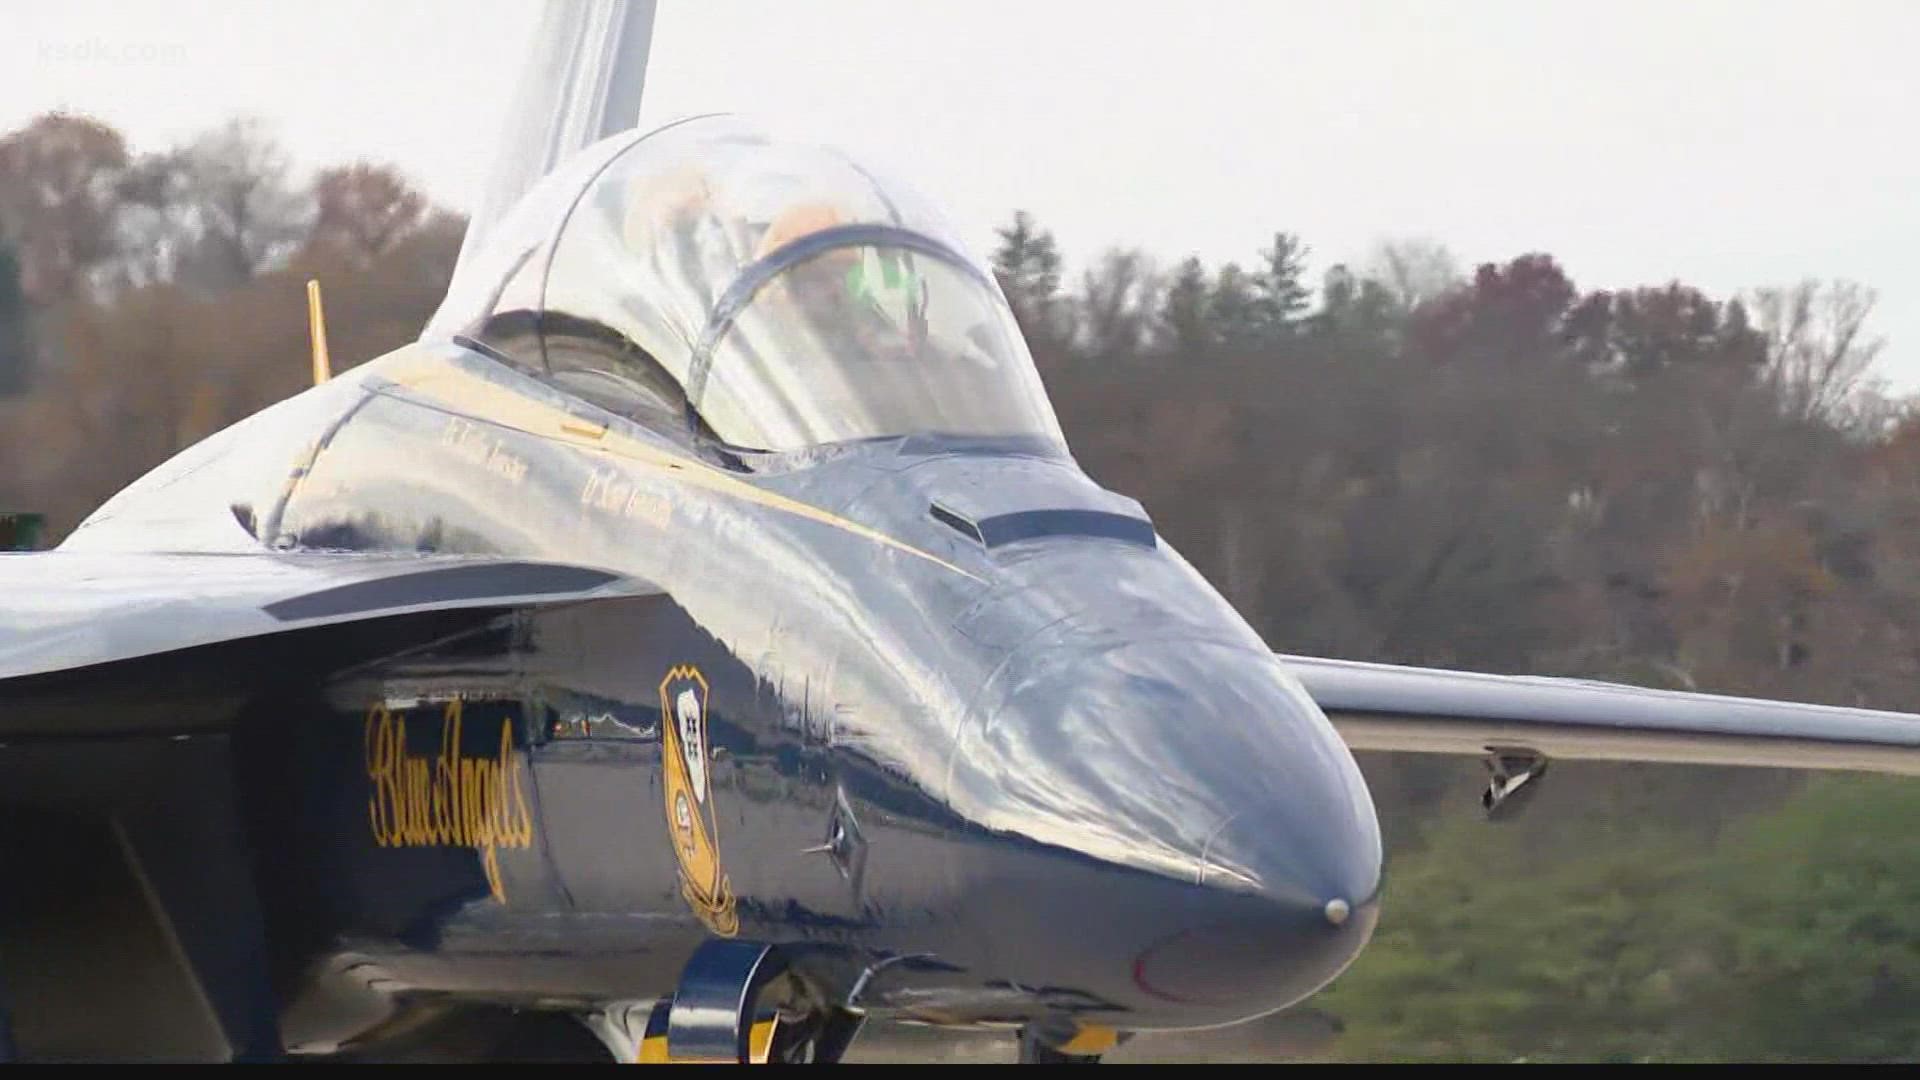 Tickets on sale to see Blue Angels in 2022